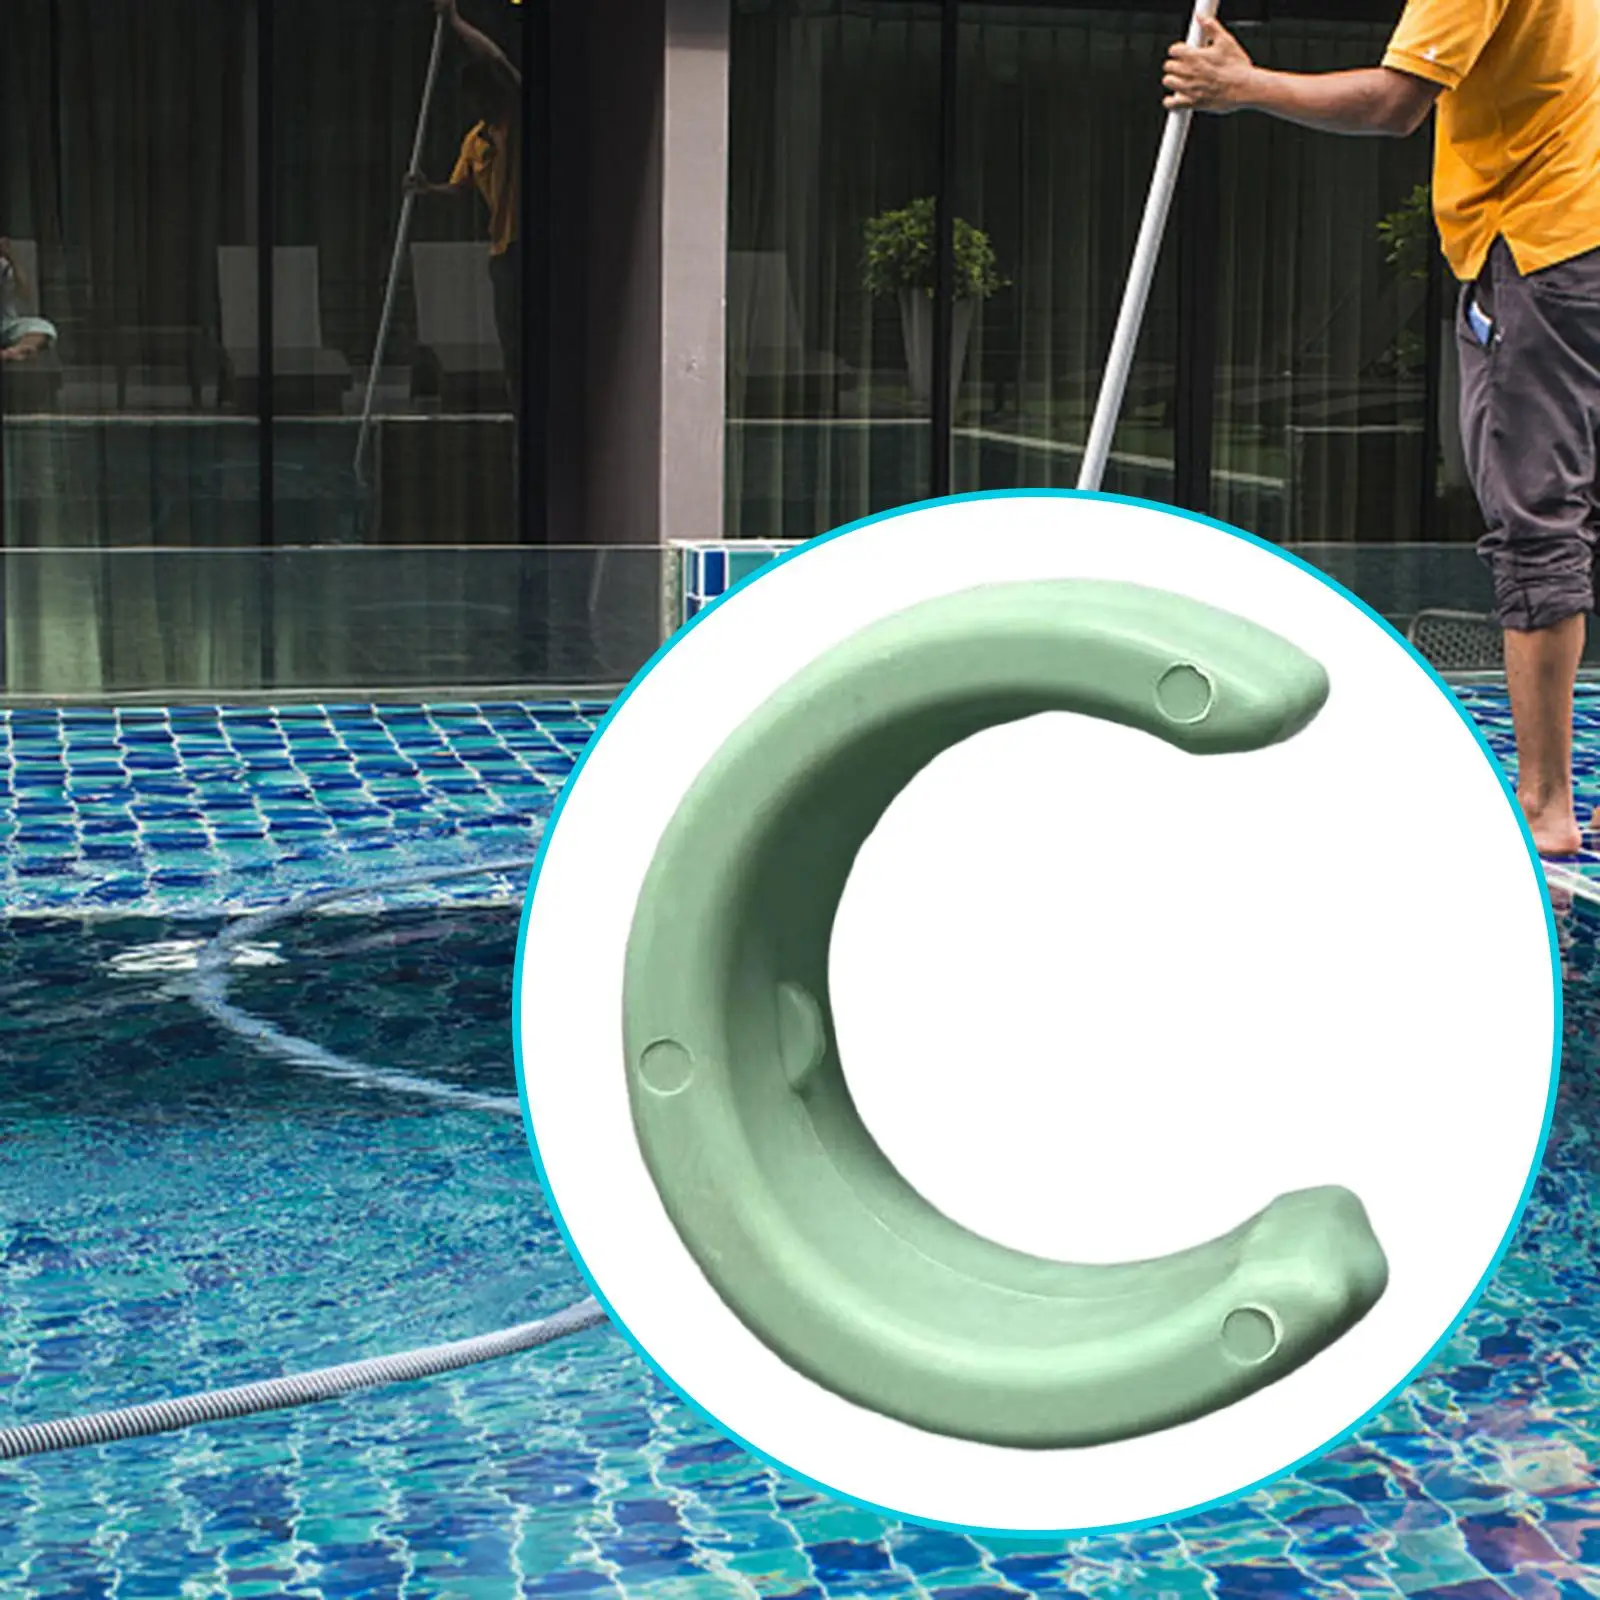 Universal Pool Cleaner Hose Weight for W83247 Pool Cleaning Tools Keep The Crawler Hose under Water Pool Cleaner Hose Weight